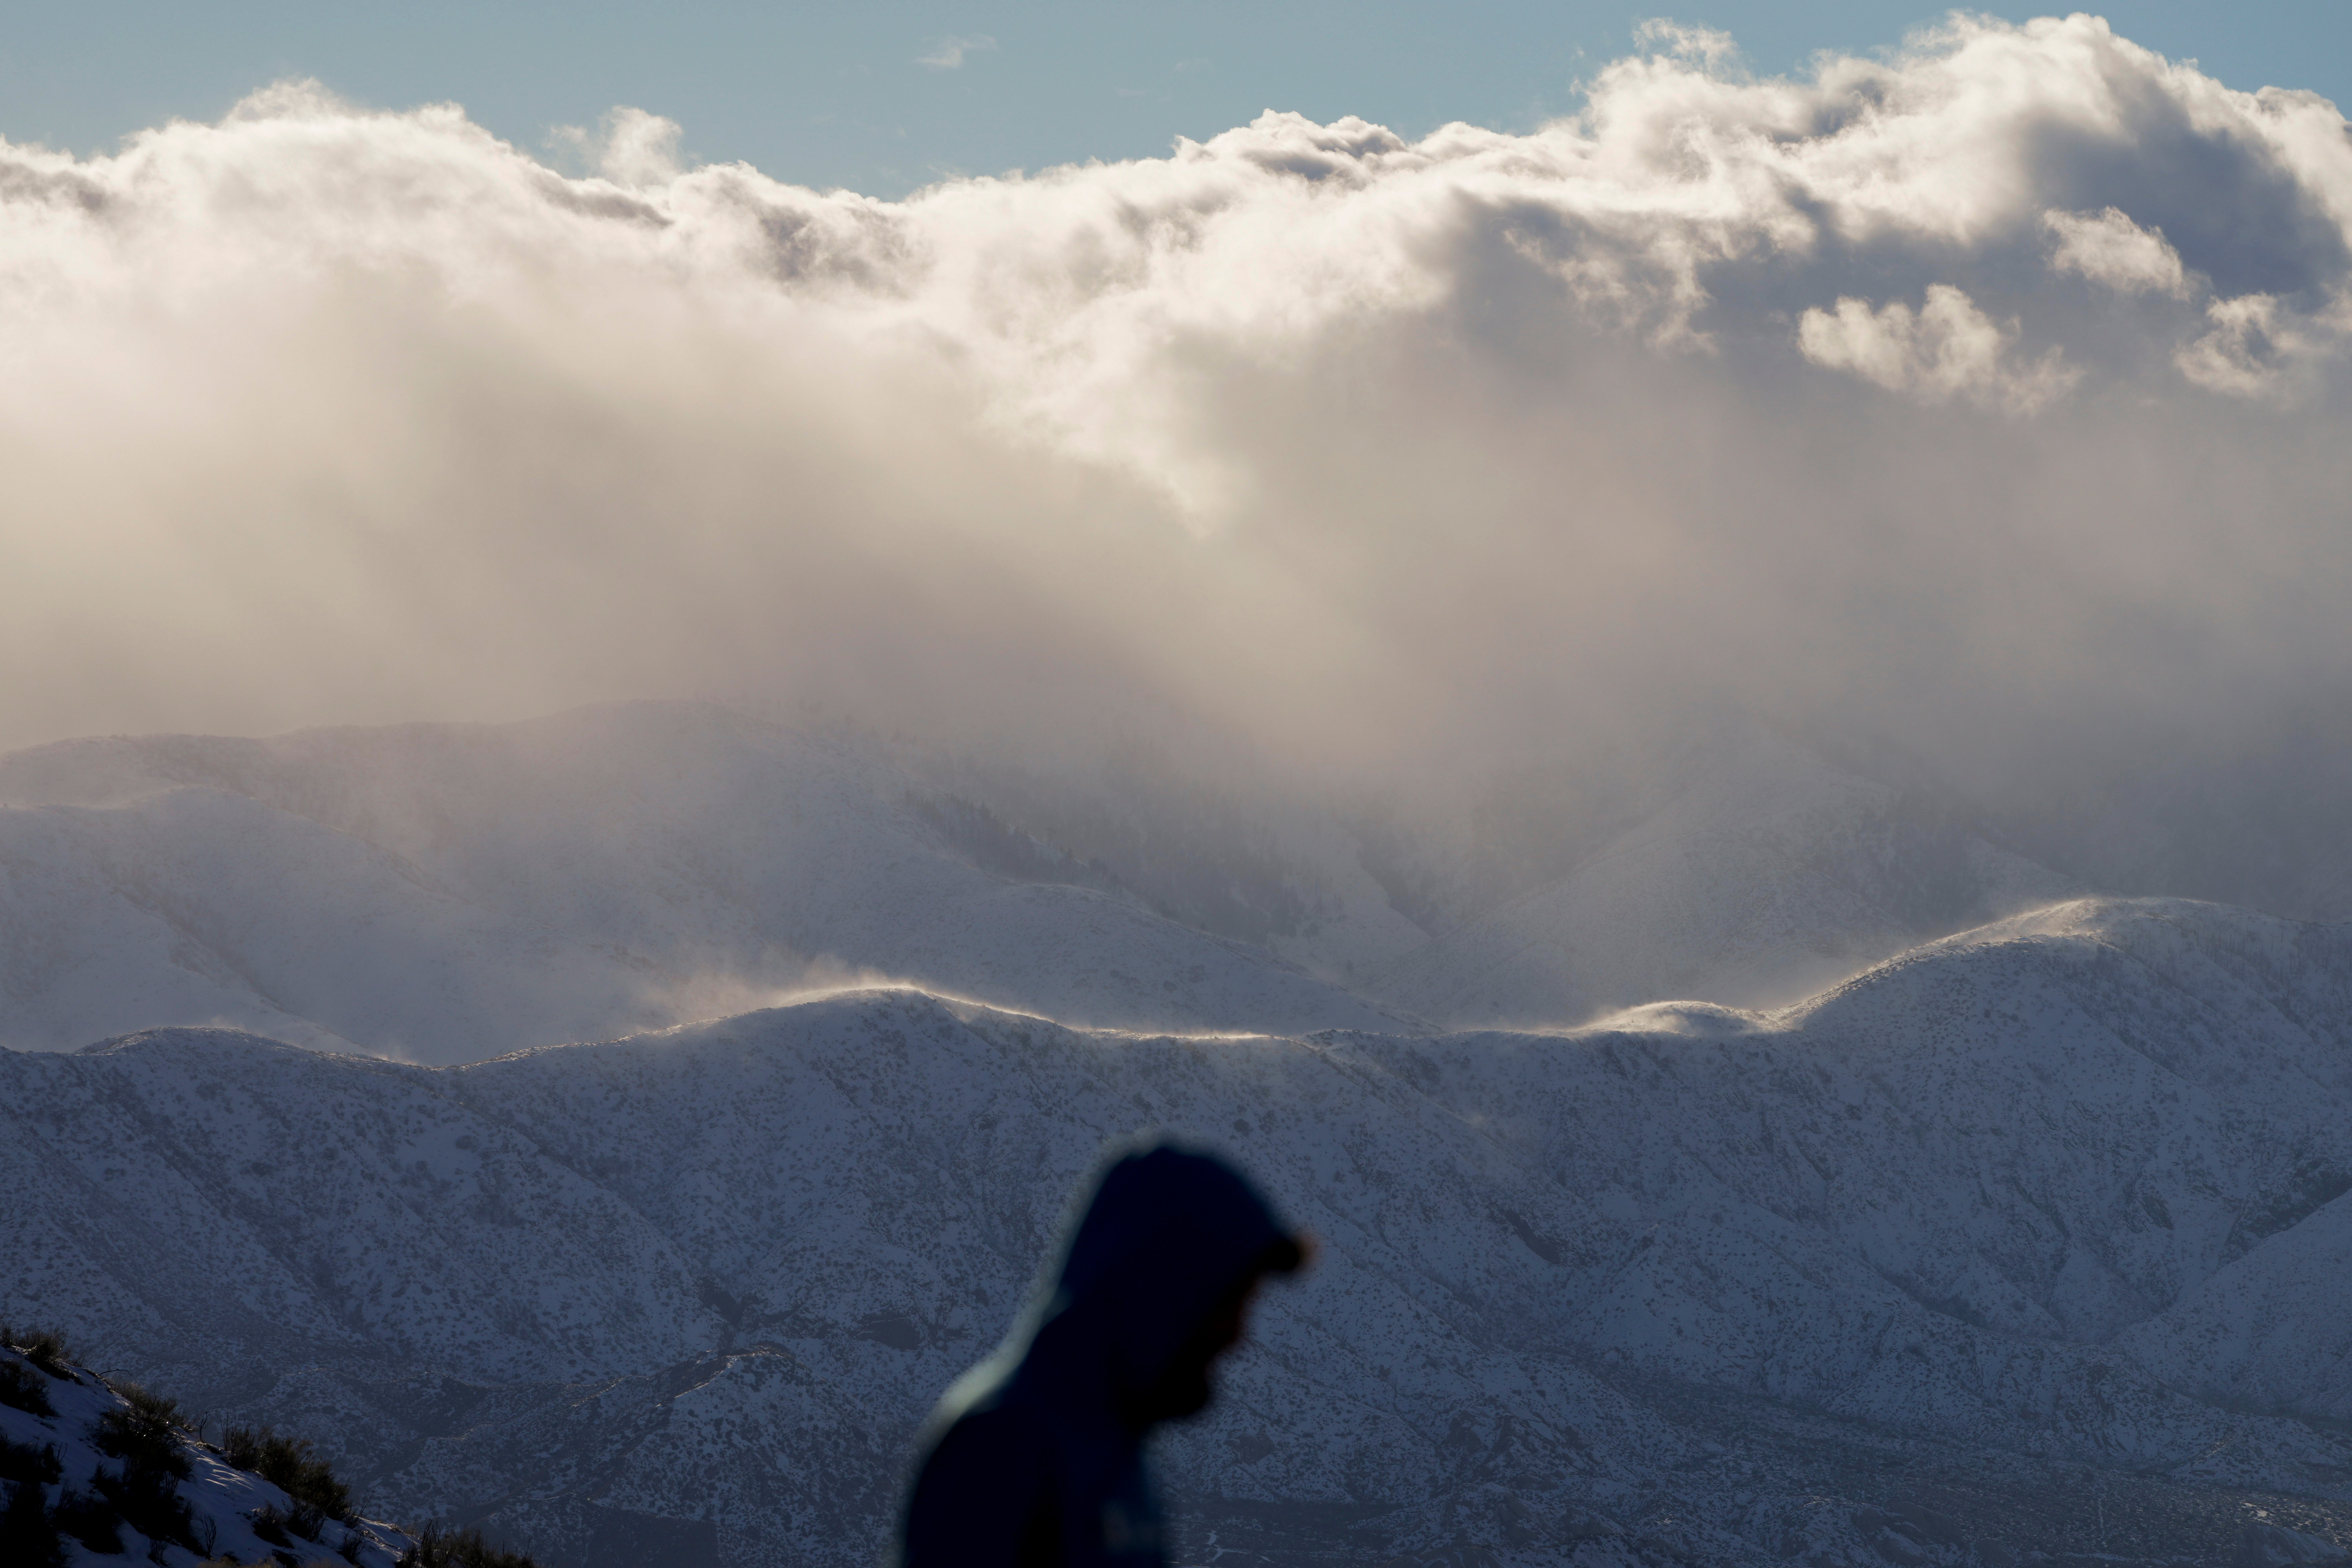 A visitor at a scenic outlook is backdropped by snow-covered mountains near Hesperia, California on Wednesday, March 1, 2023. (Photo: Jae C. Hong, AP)